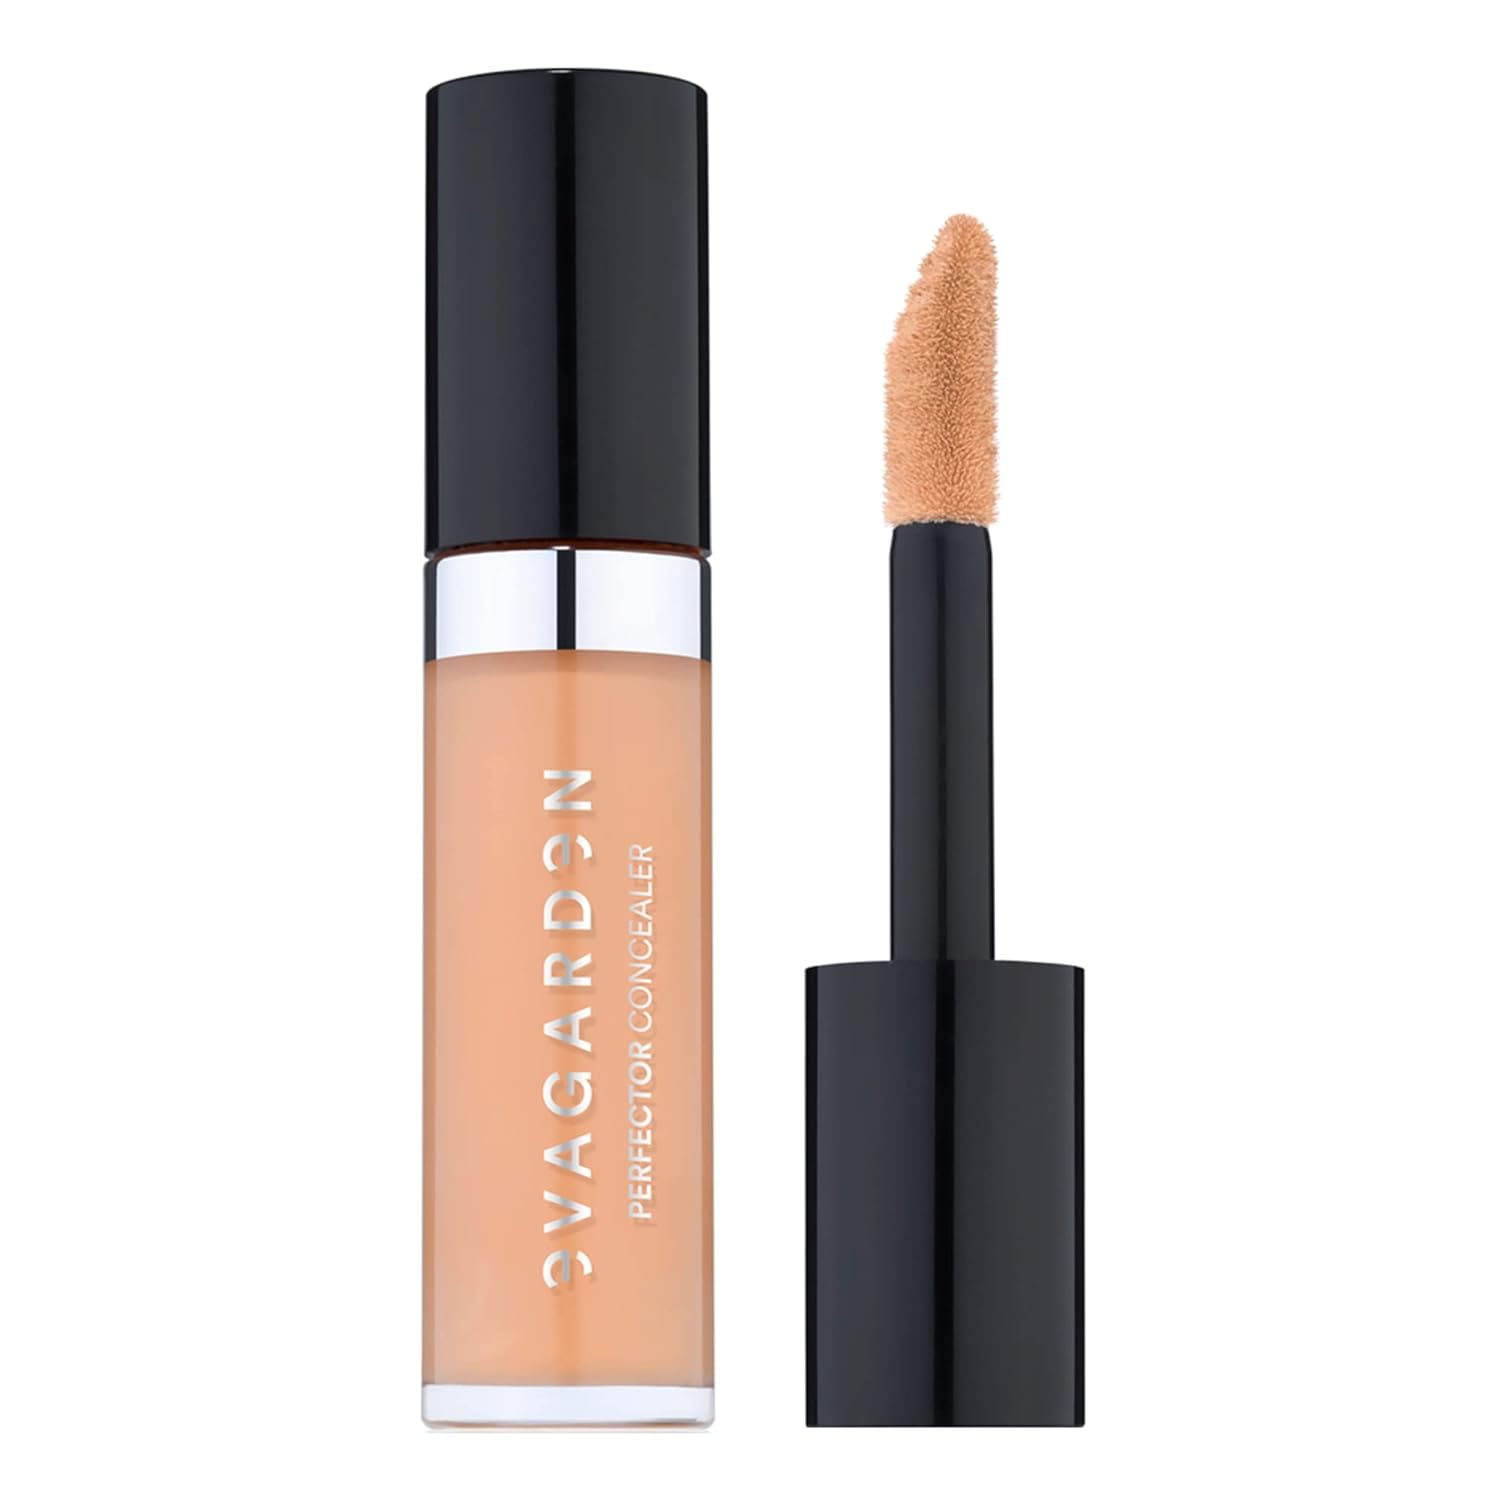 EVAGARDEN Perfector Concealer - Multi-Purpose Product with Moisturizing Properties - Touches Up, Defines, Enhances and Sculpts - Light and Creamy Texture with Rich Color - 332 Peach - 0.16